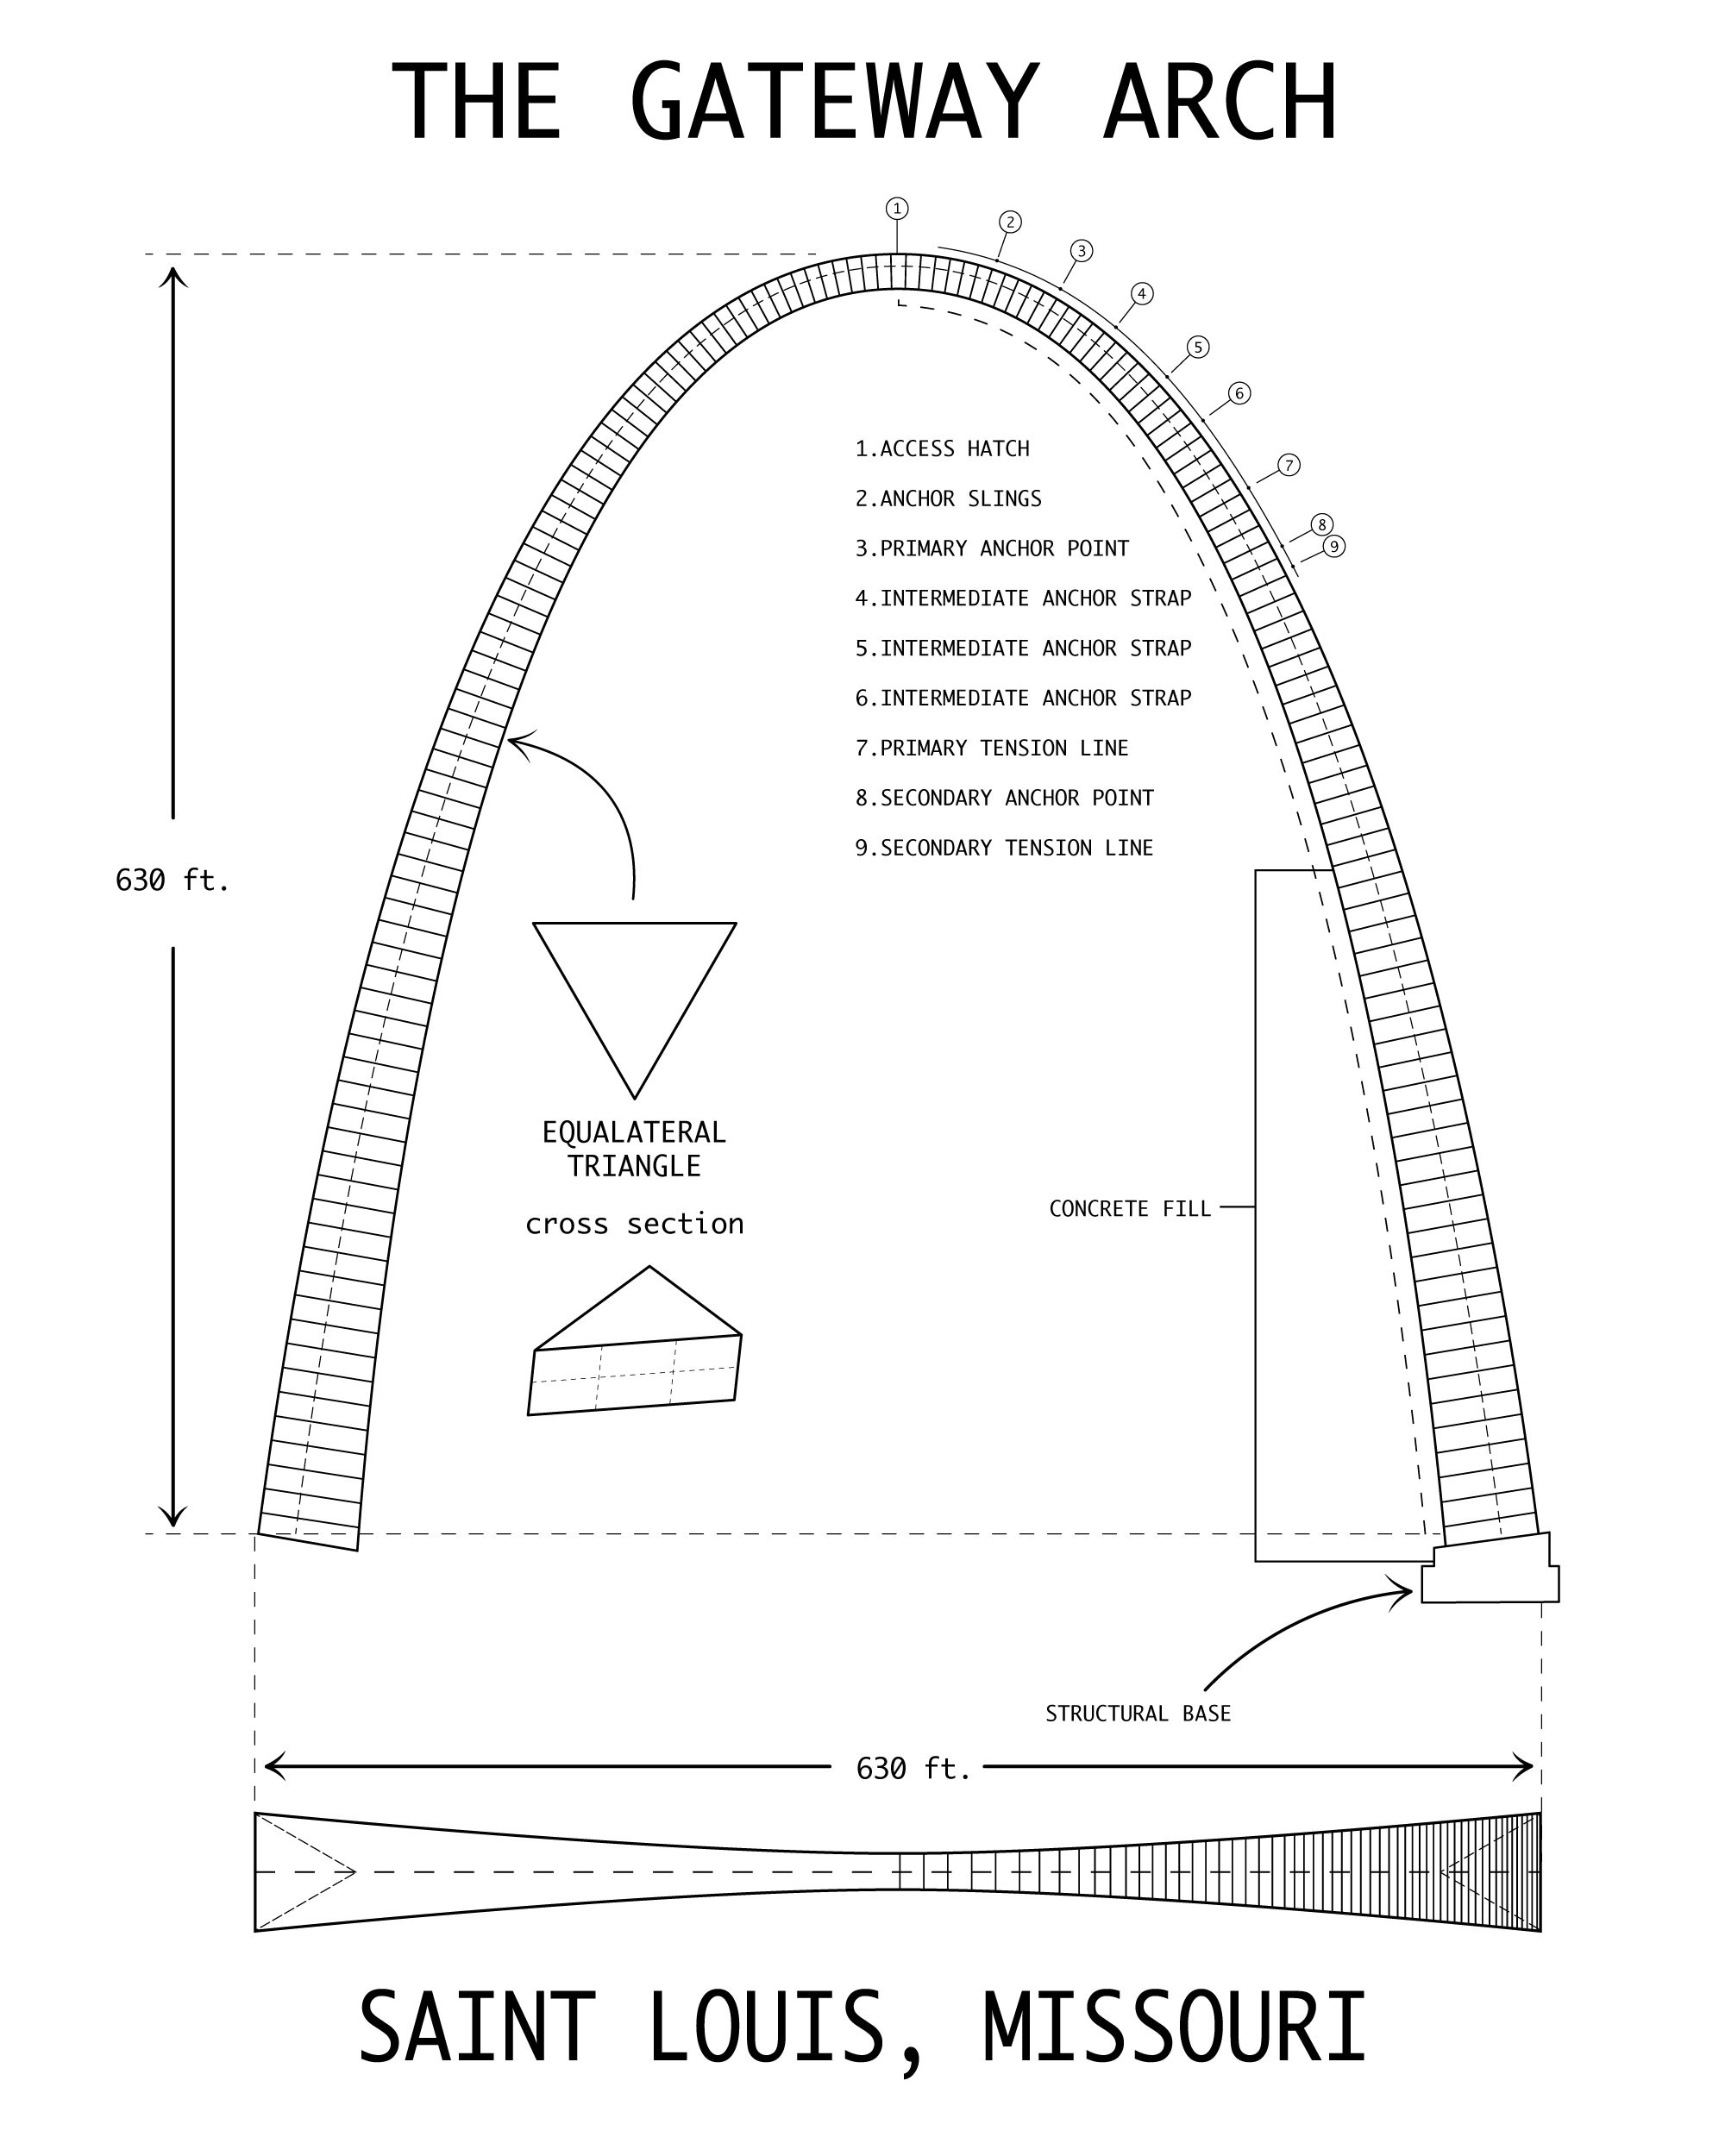 how to make a model of the st louis arch